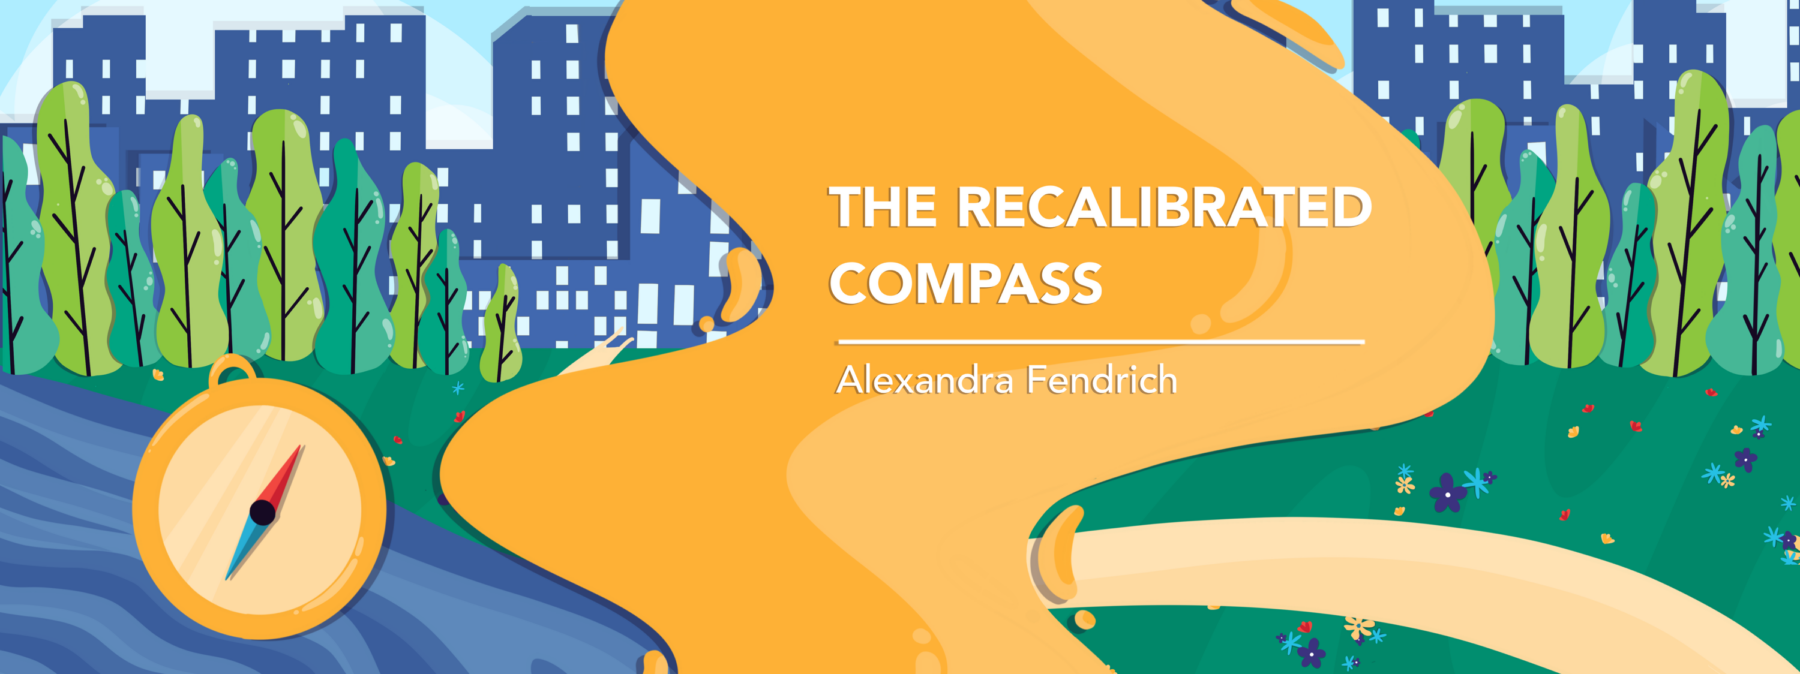 Column banner for the Recalibrated Compass by Alexandra Fendrich